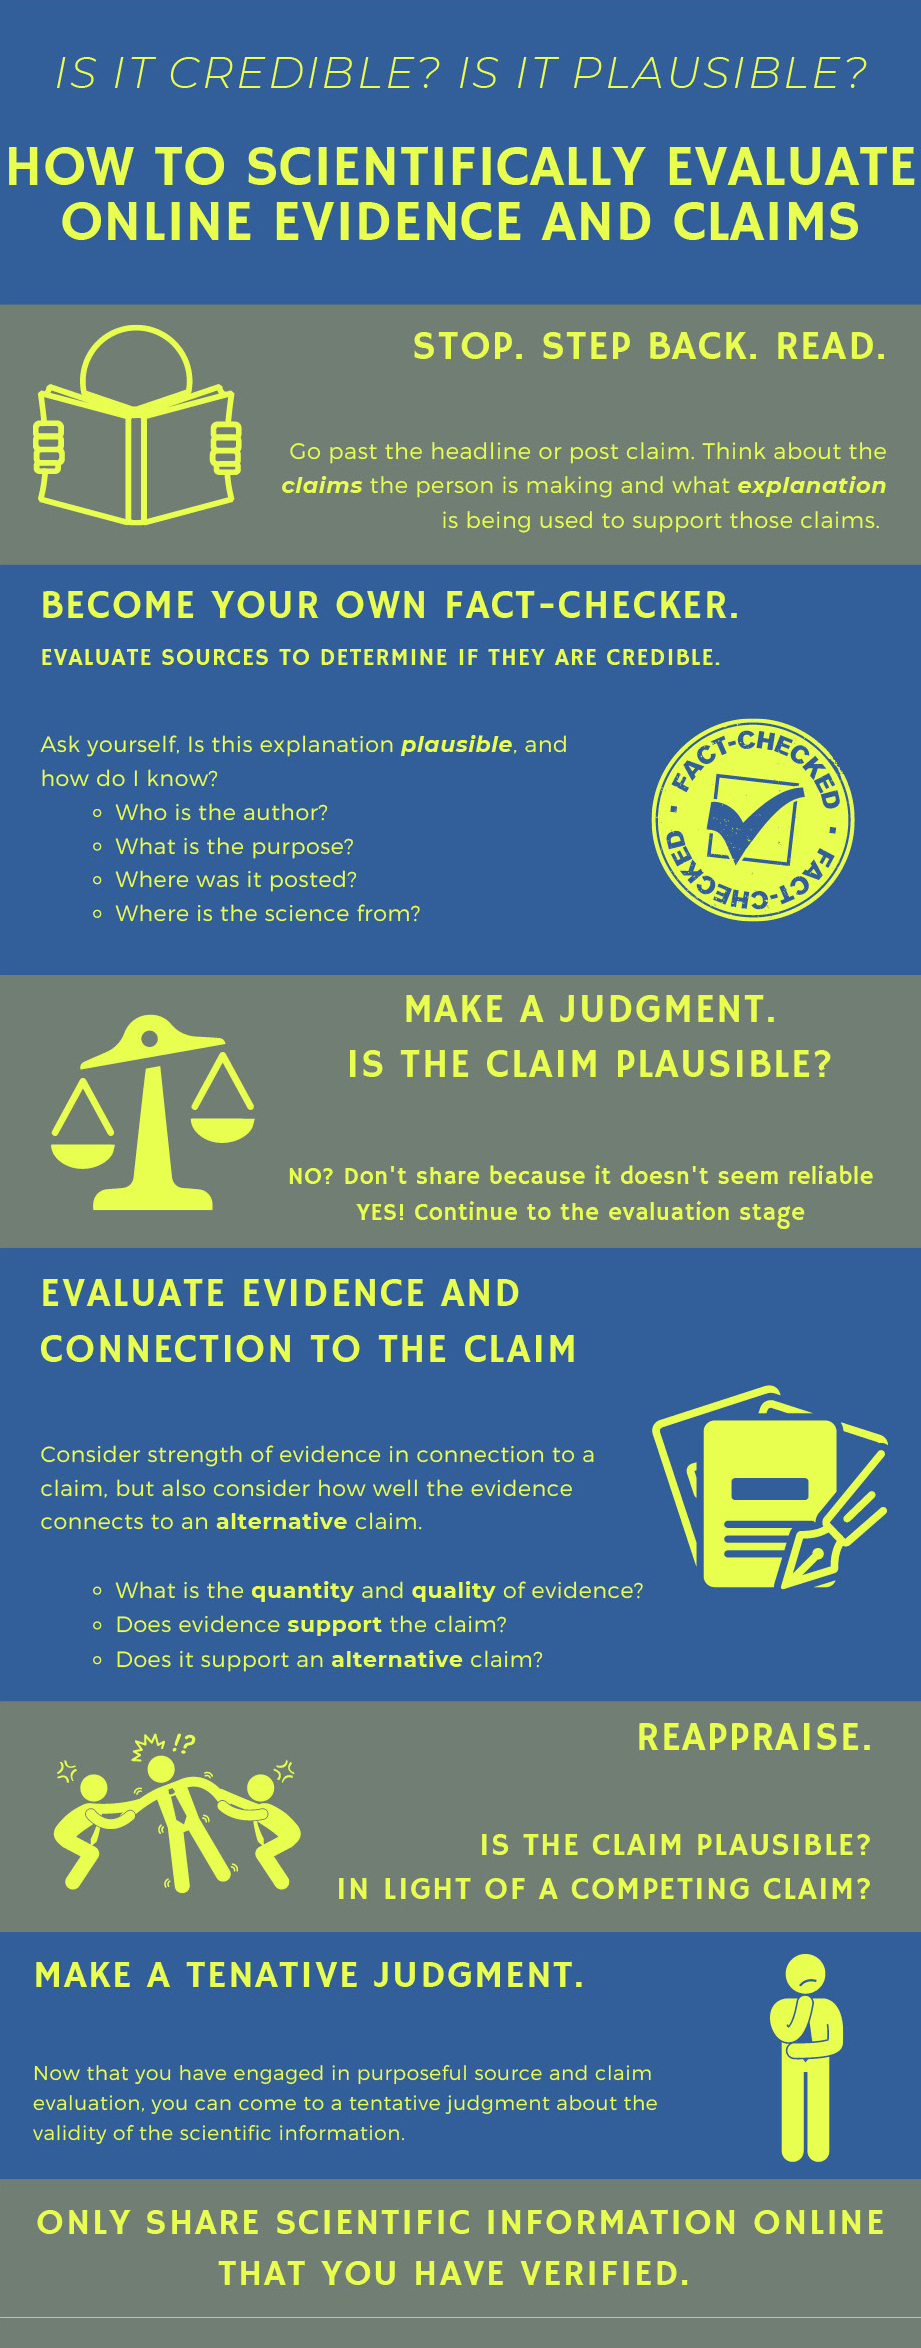 How to scientifically evaluate online evidence and claims infographic